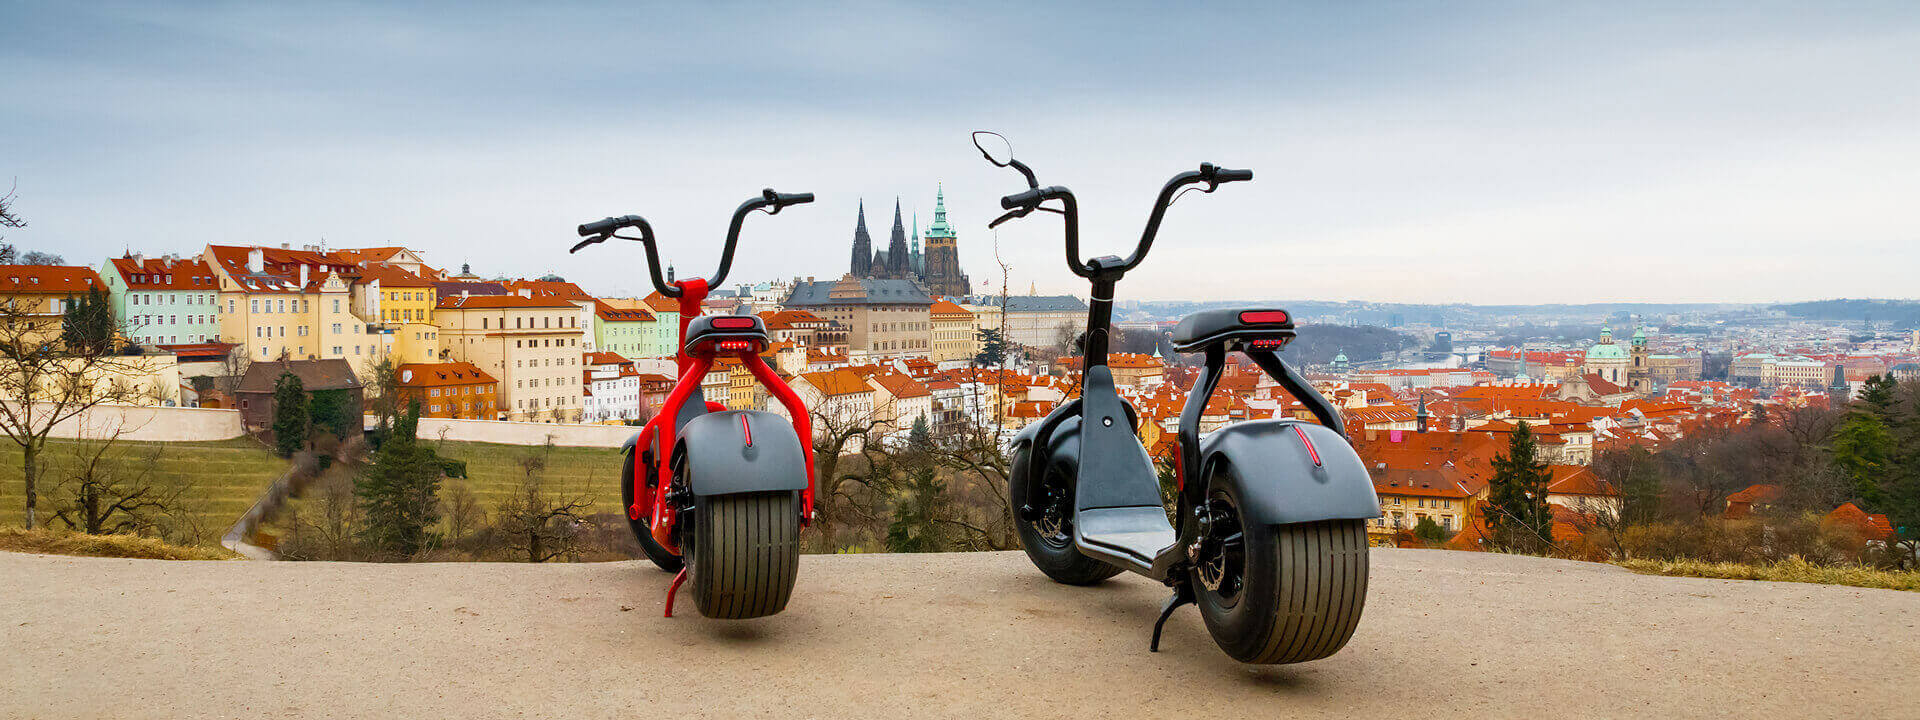 SCROOSER Tour Prague – Guided sightseeing tours on unique electric scooters in Prague